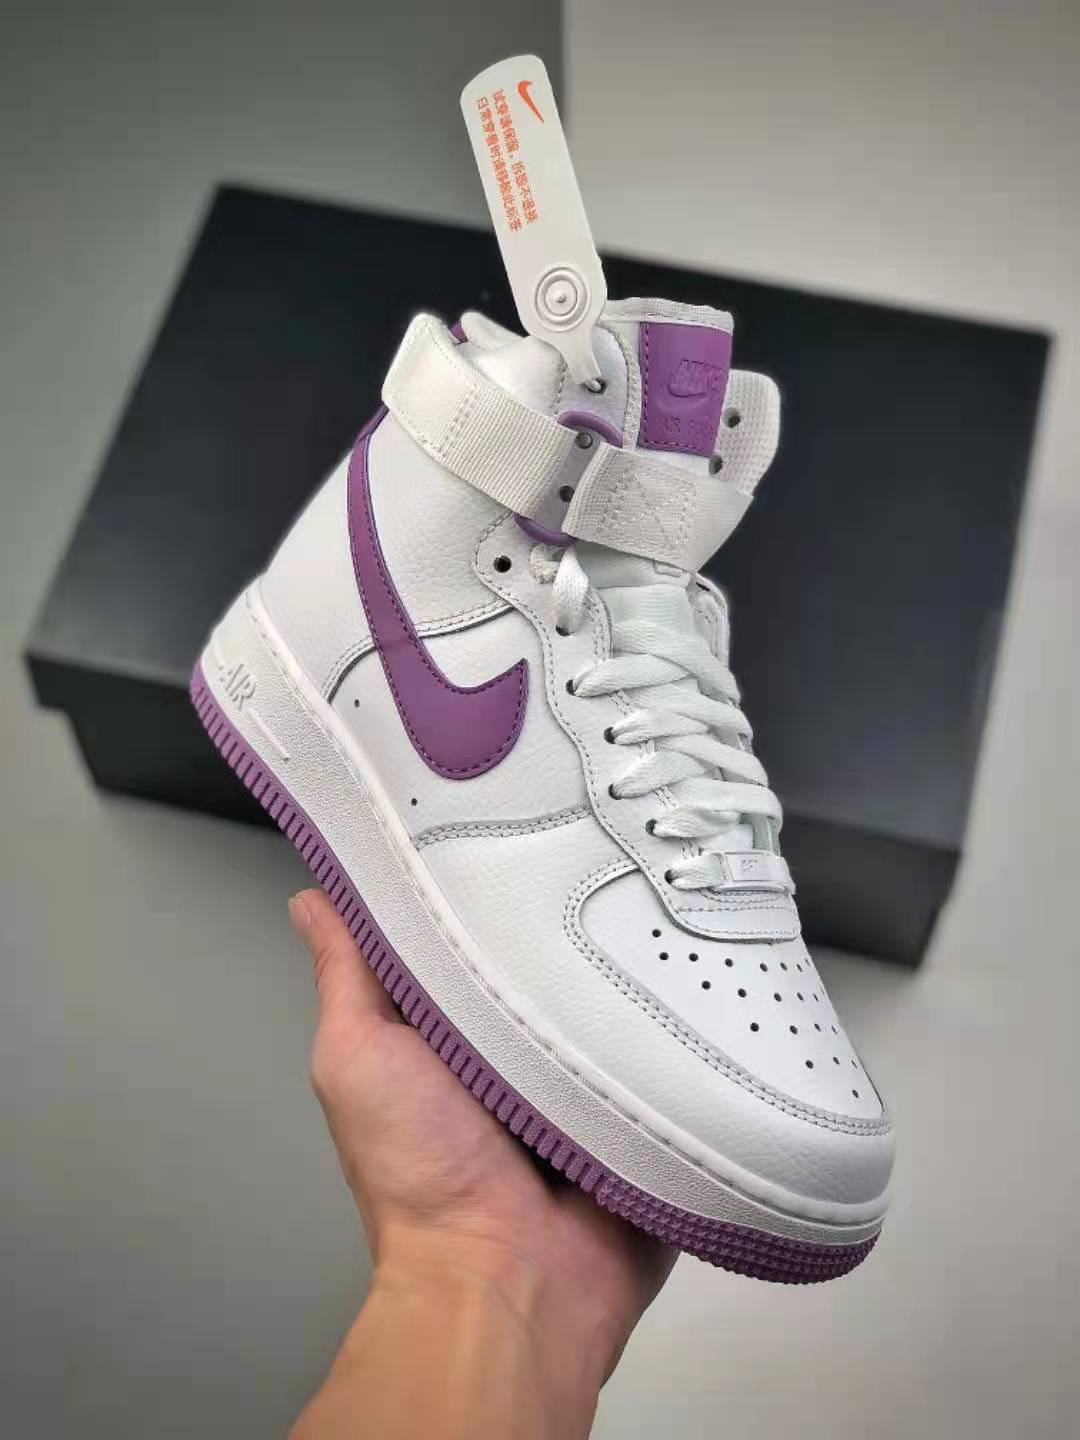 Nike Air Force 1 High 'White Dark Orchid' 334031-112 - Premium Sneakers for Sale